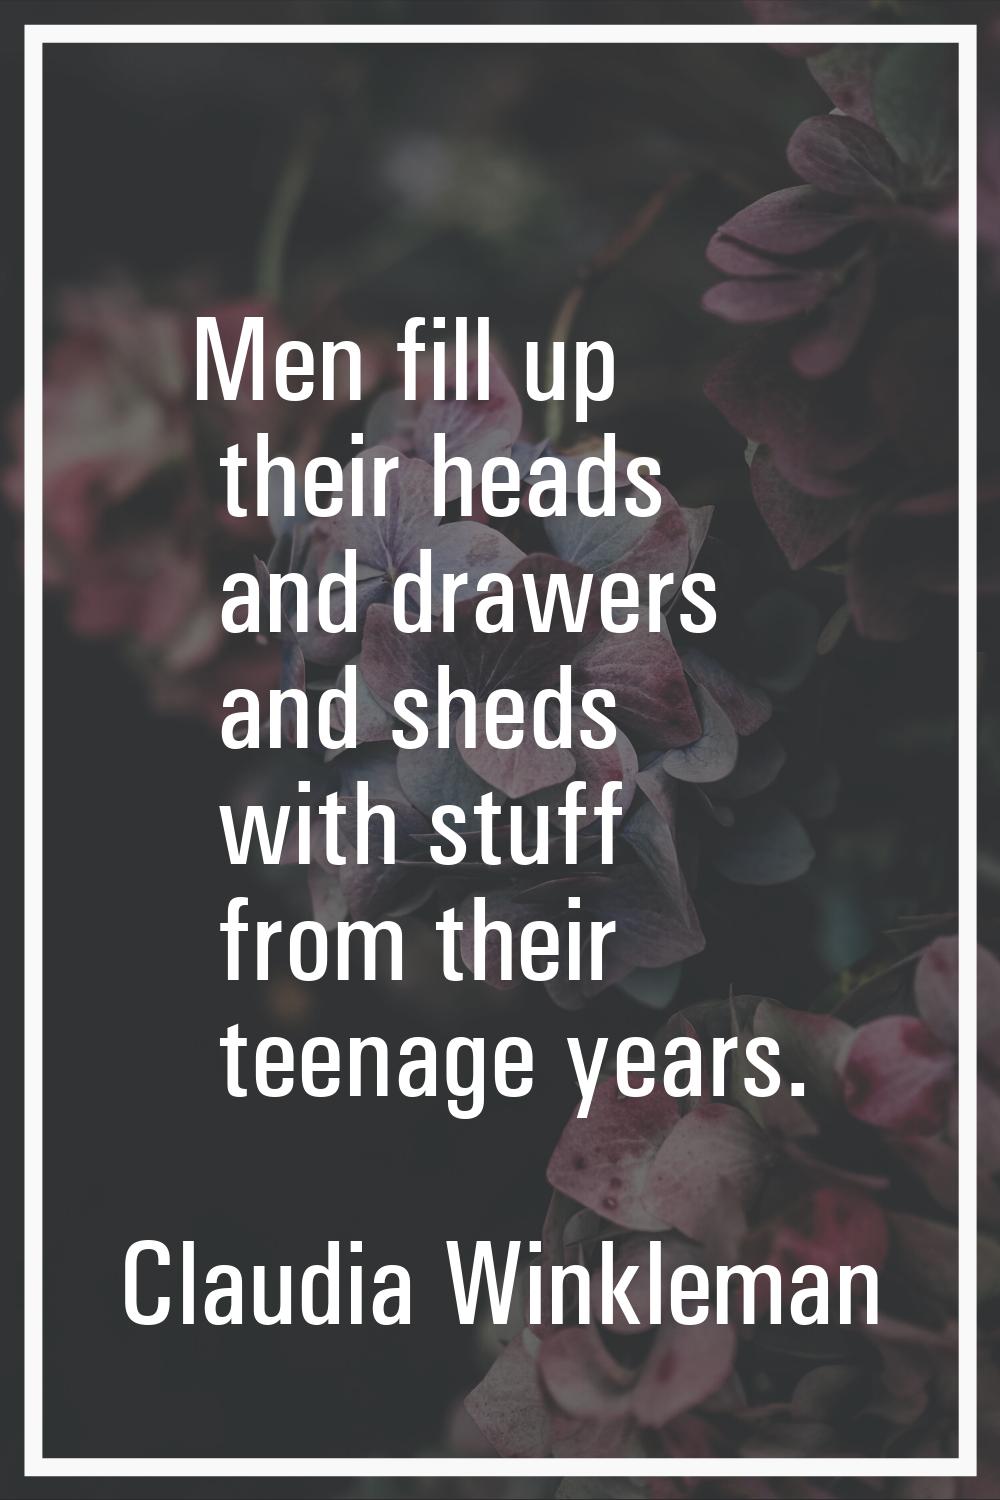 Men fill up their heads and drawers and sheds with stuff from their teenage years.